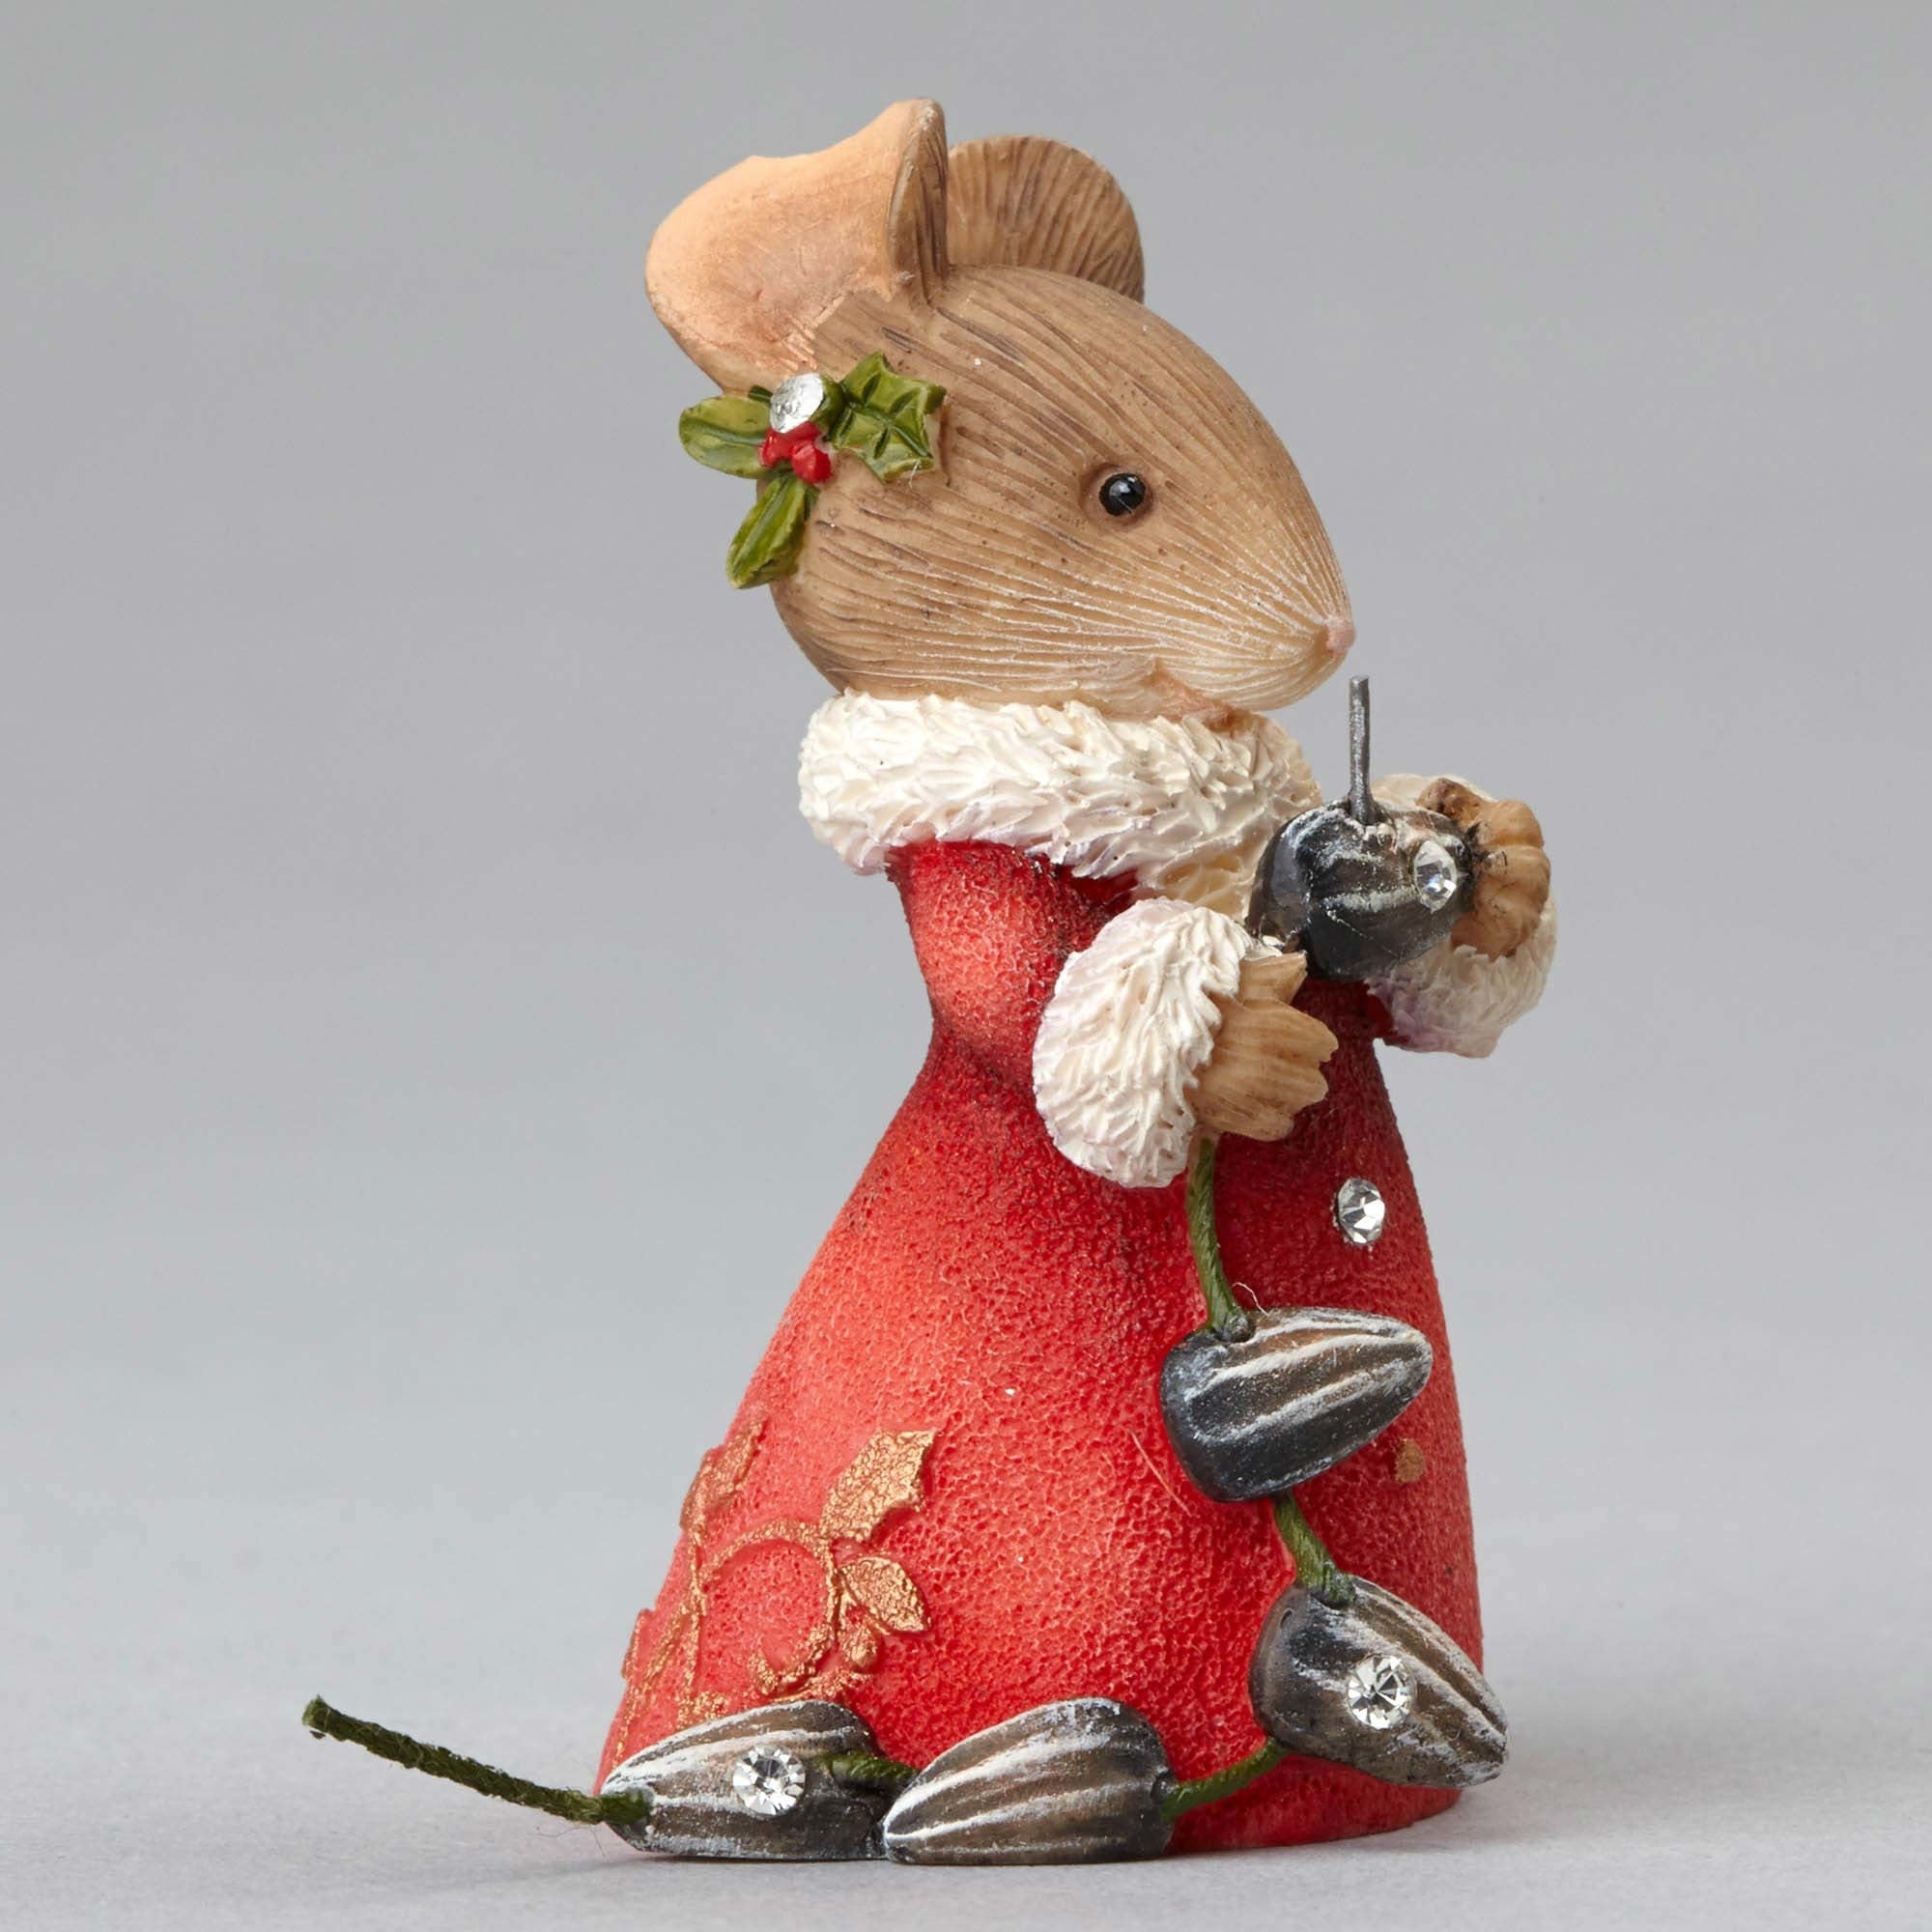 Mouse Making Garland with Seeds by Heart of Christmas